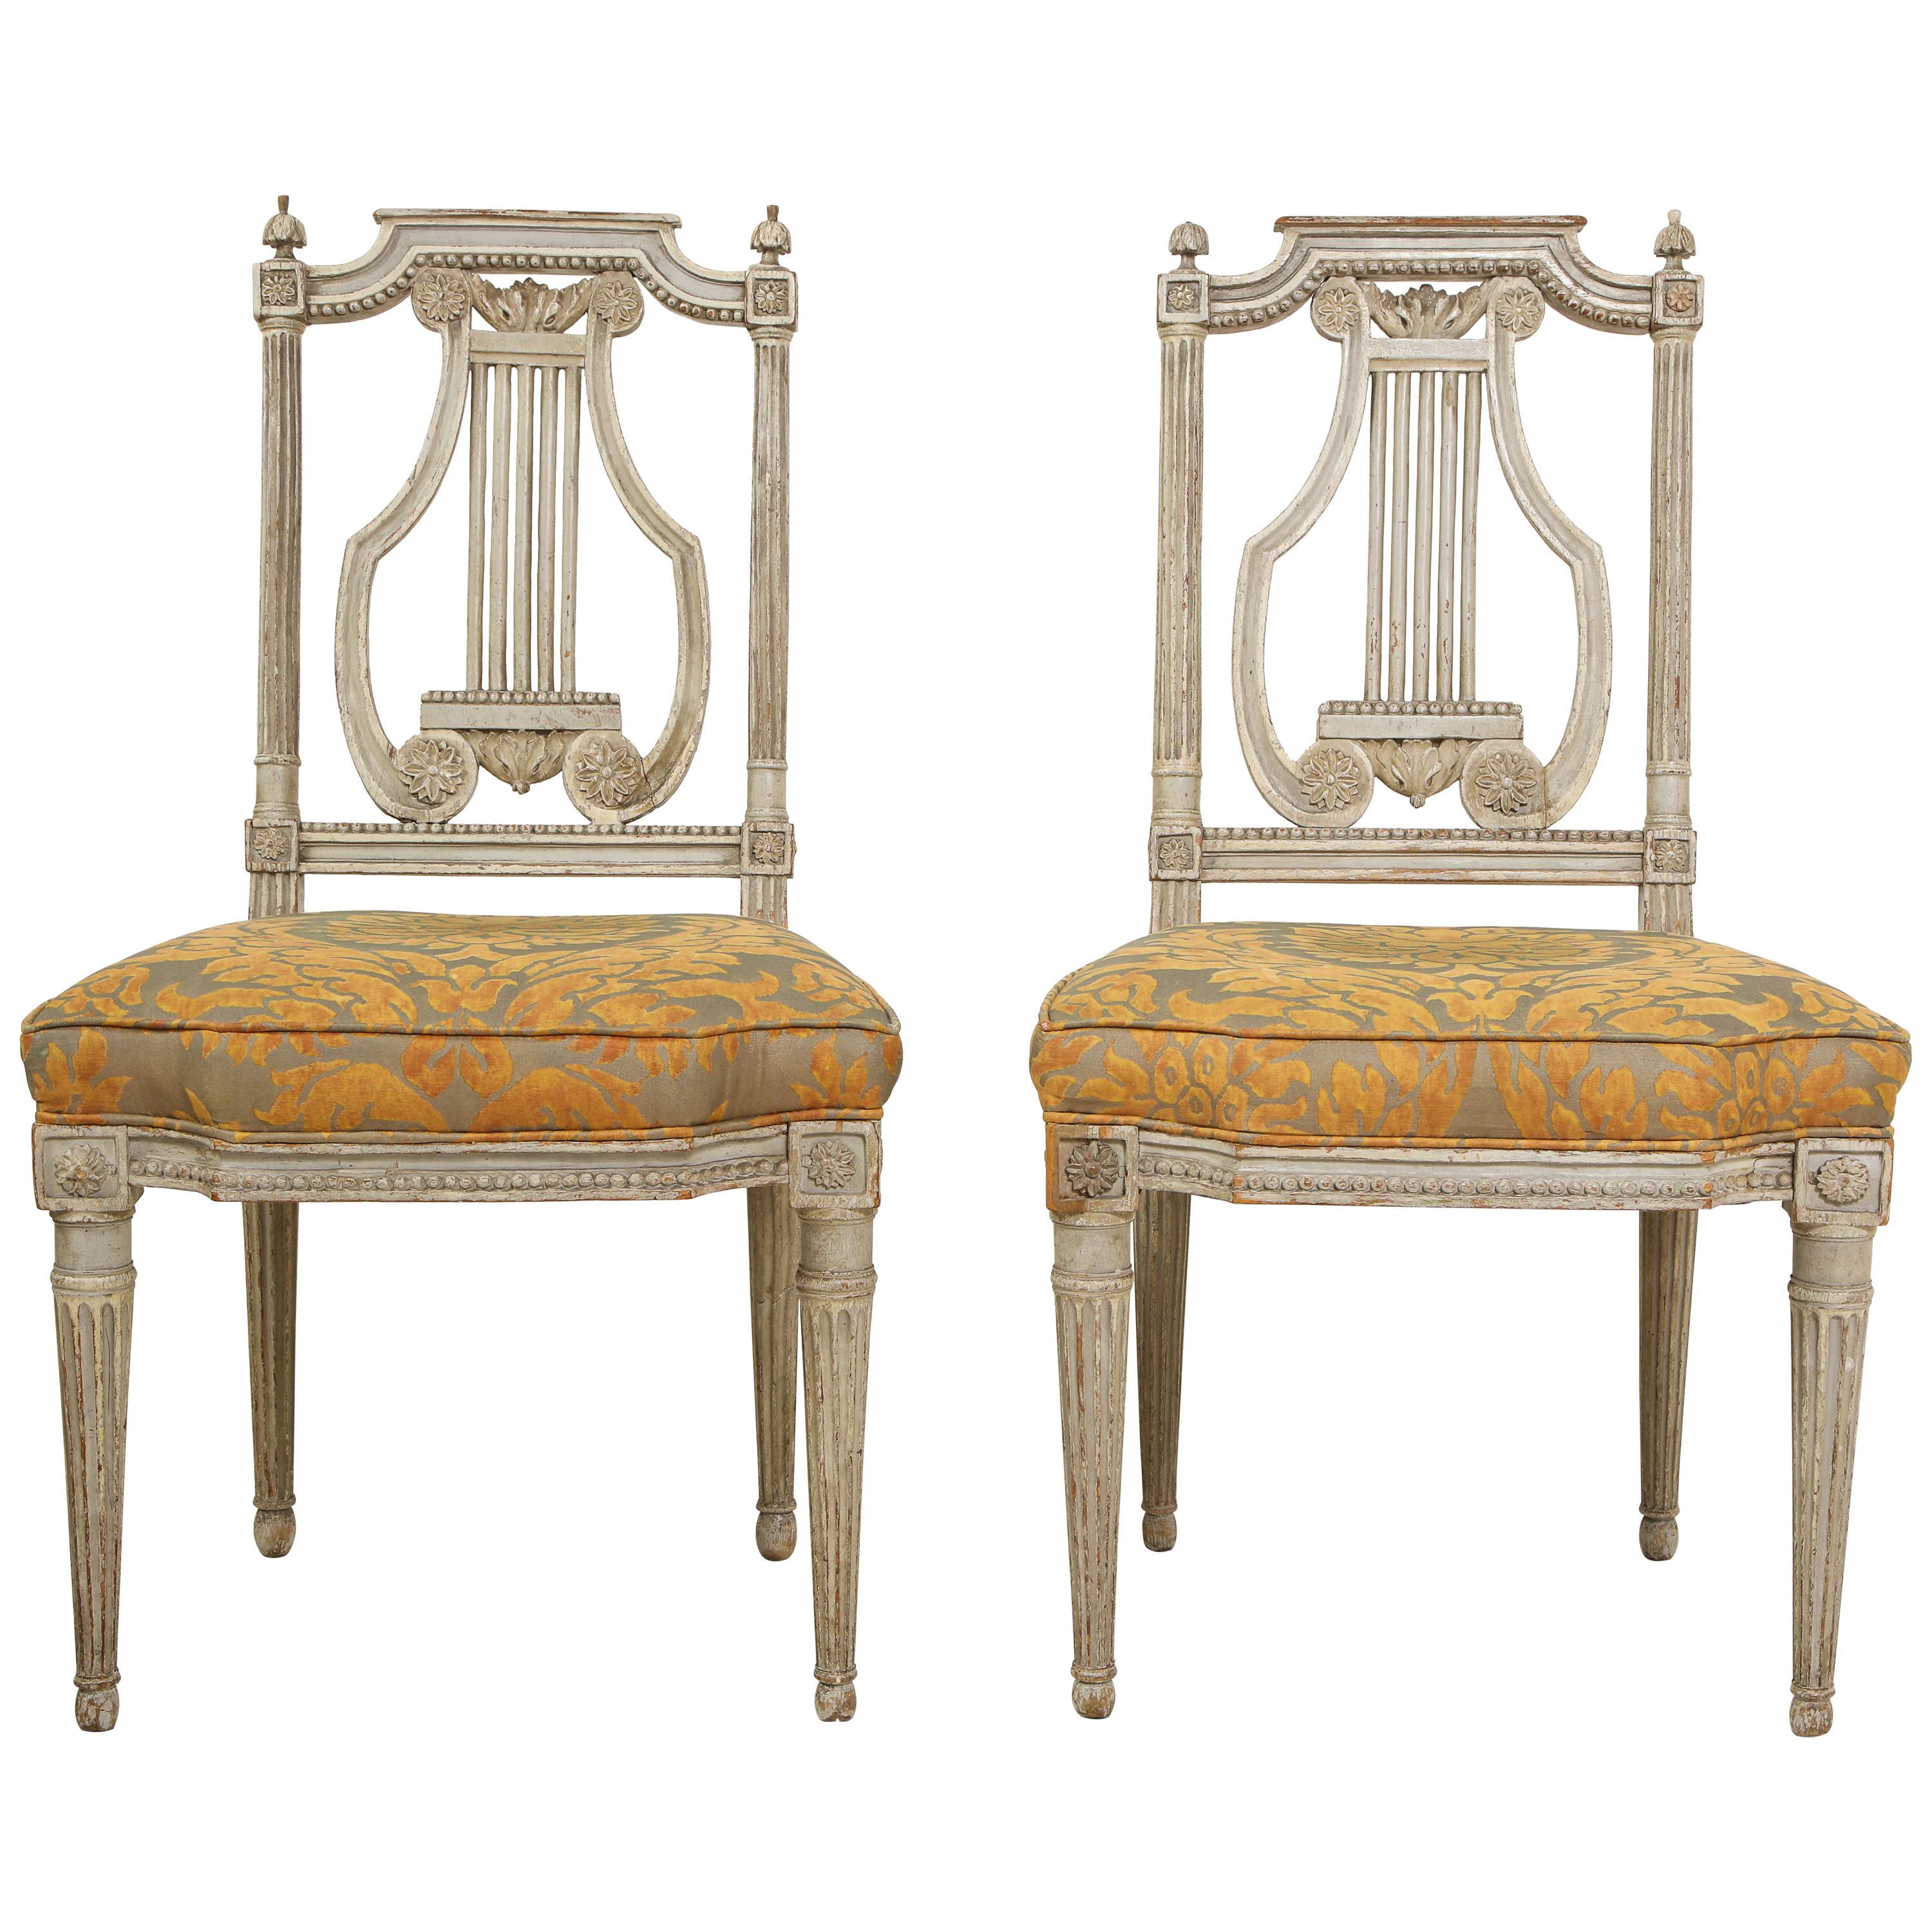 Pair of 19th Century Italian Painted Lyre-Back Chairs with Fortuny Seat Cushions